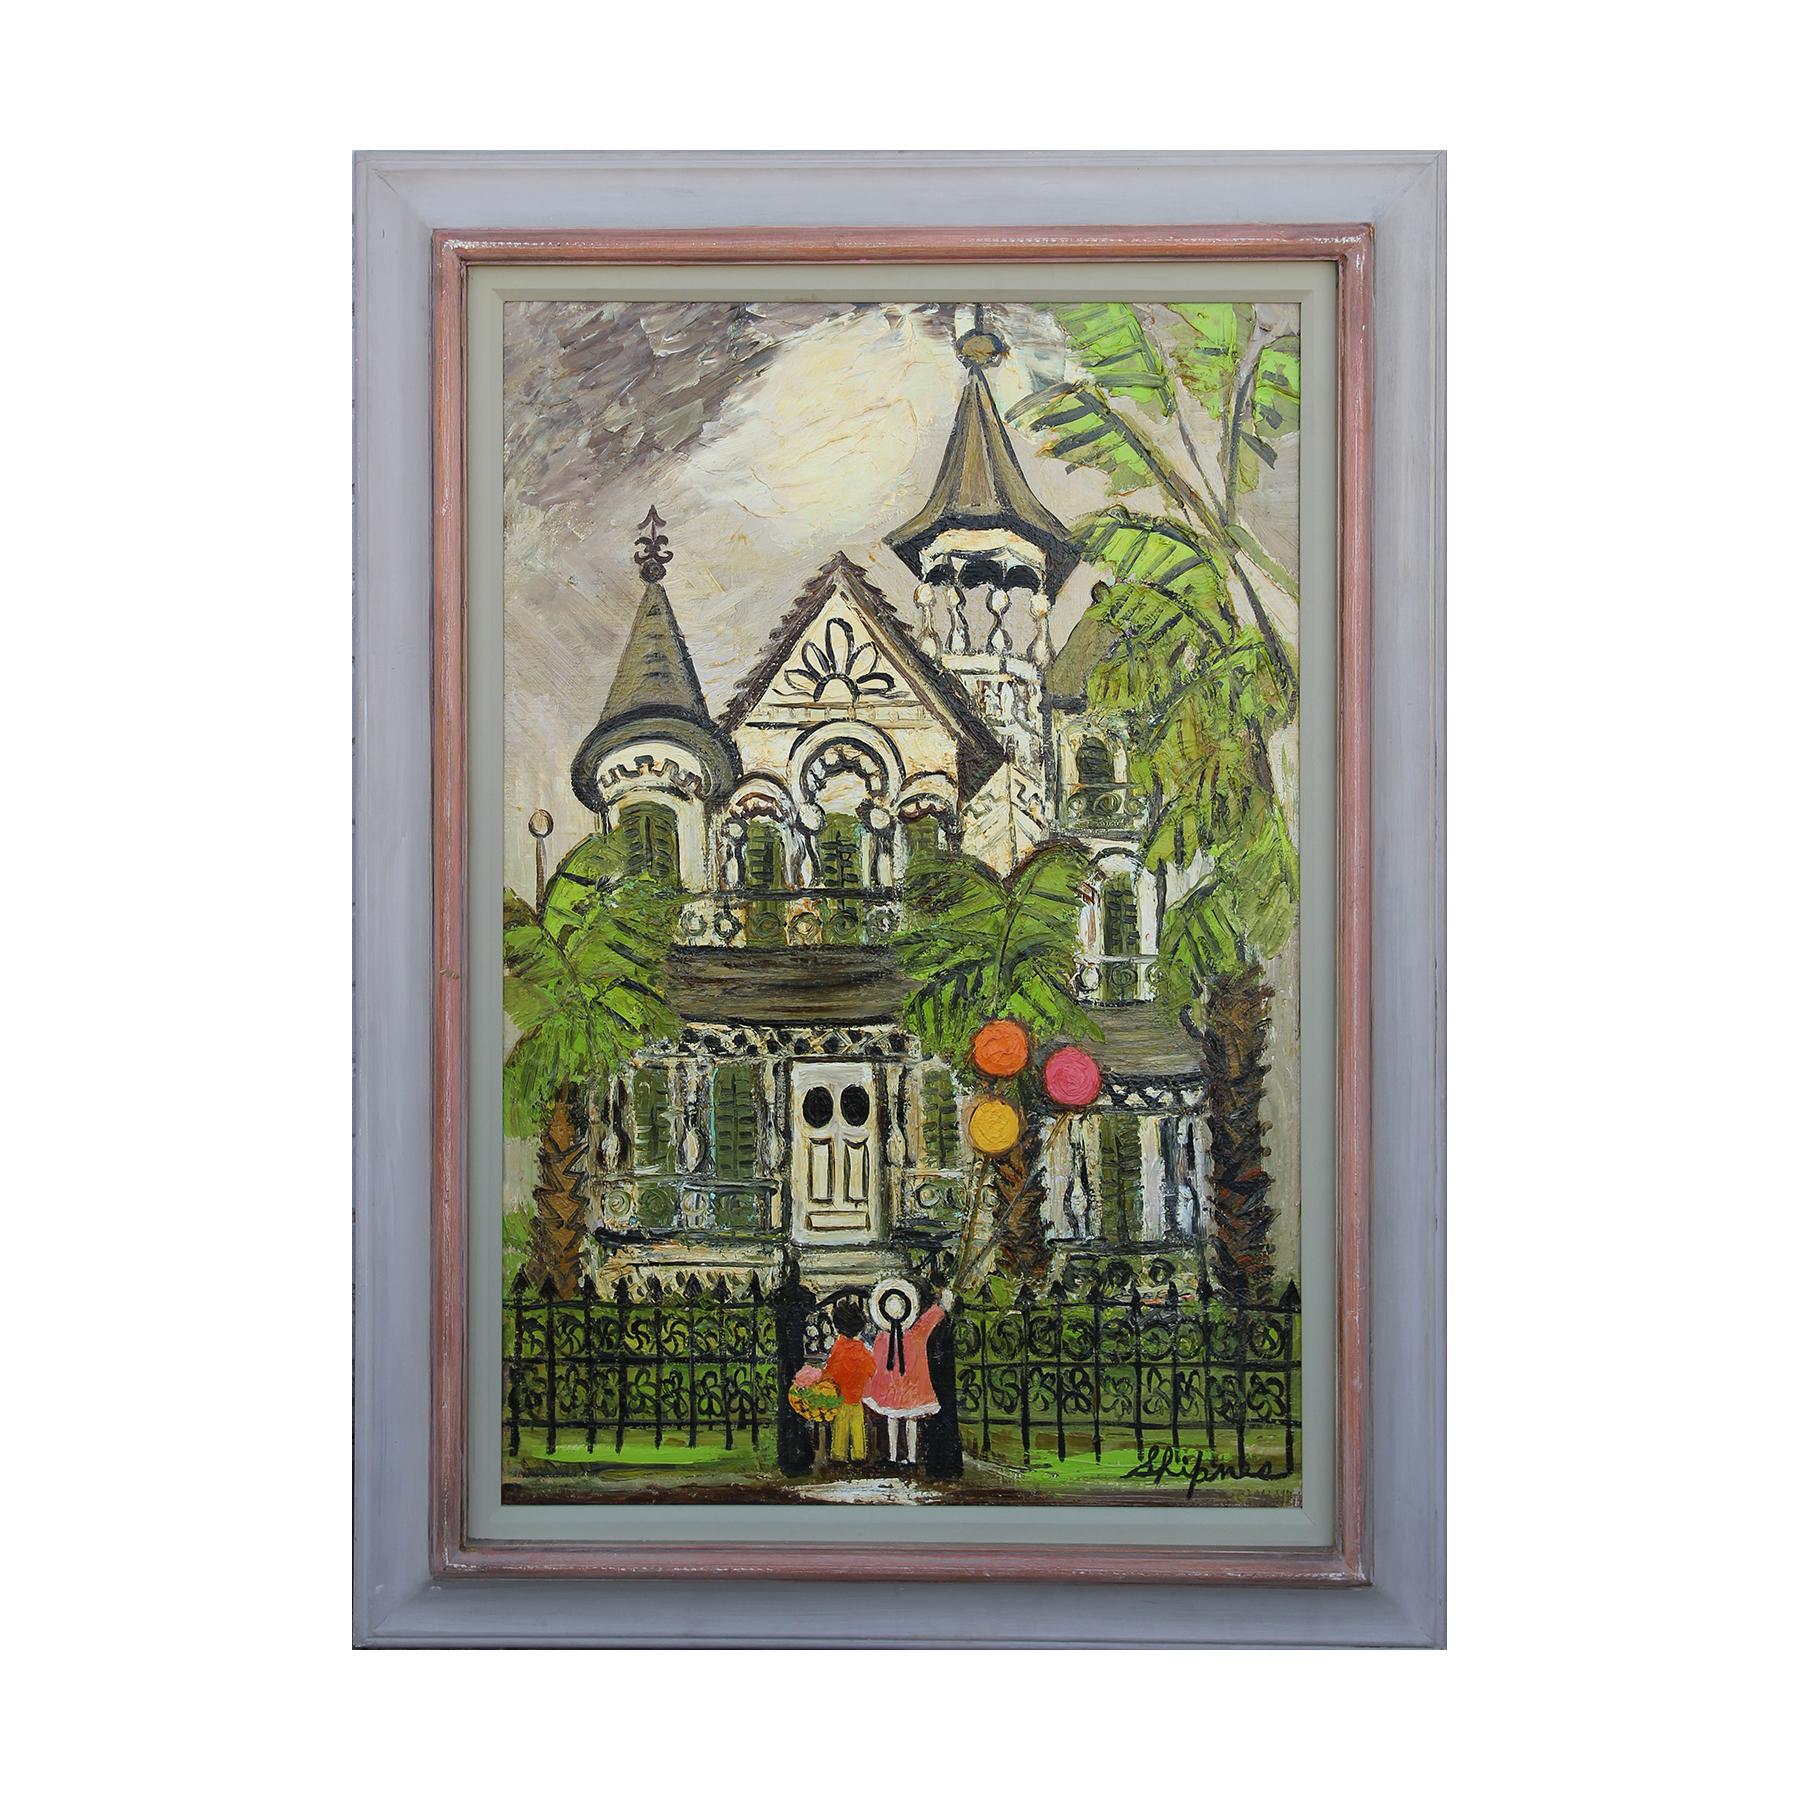 Mary Ellen Shipnes Landscape Painting - "Granny's House" Folk Art Painting of a Victorian House with Children & Balloons